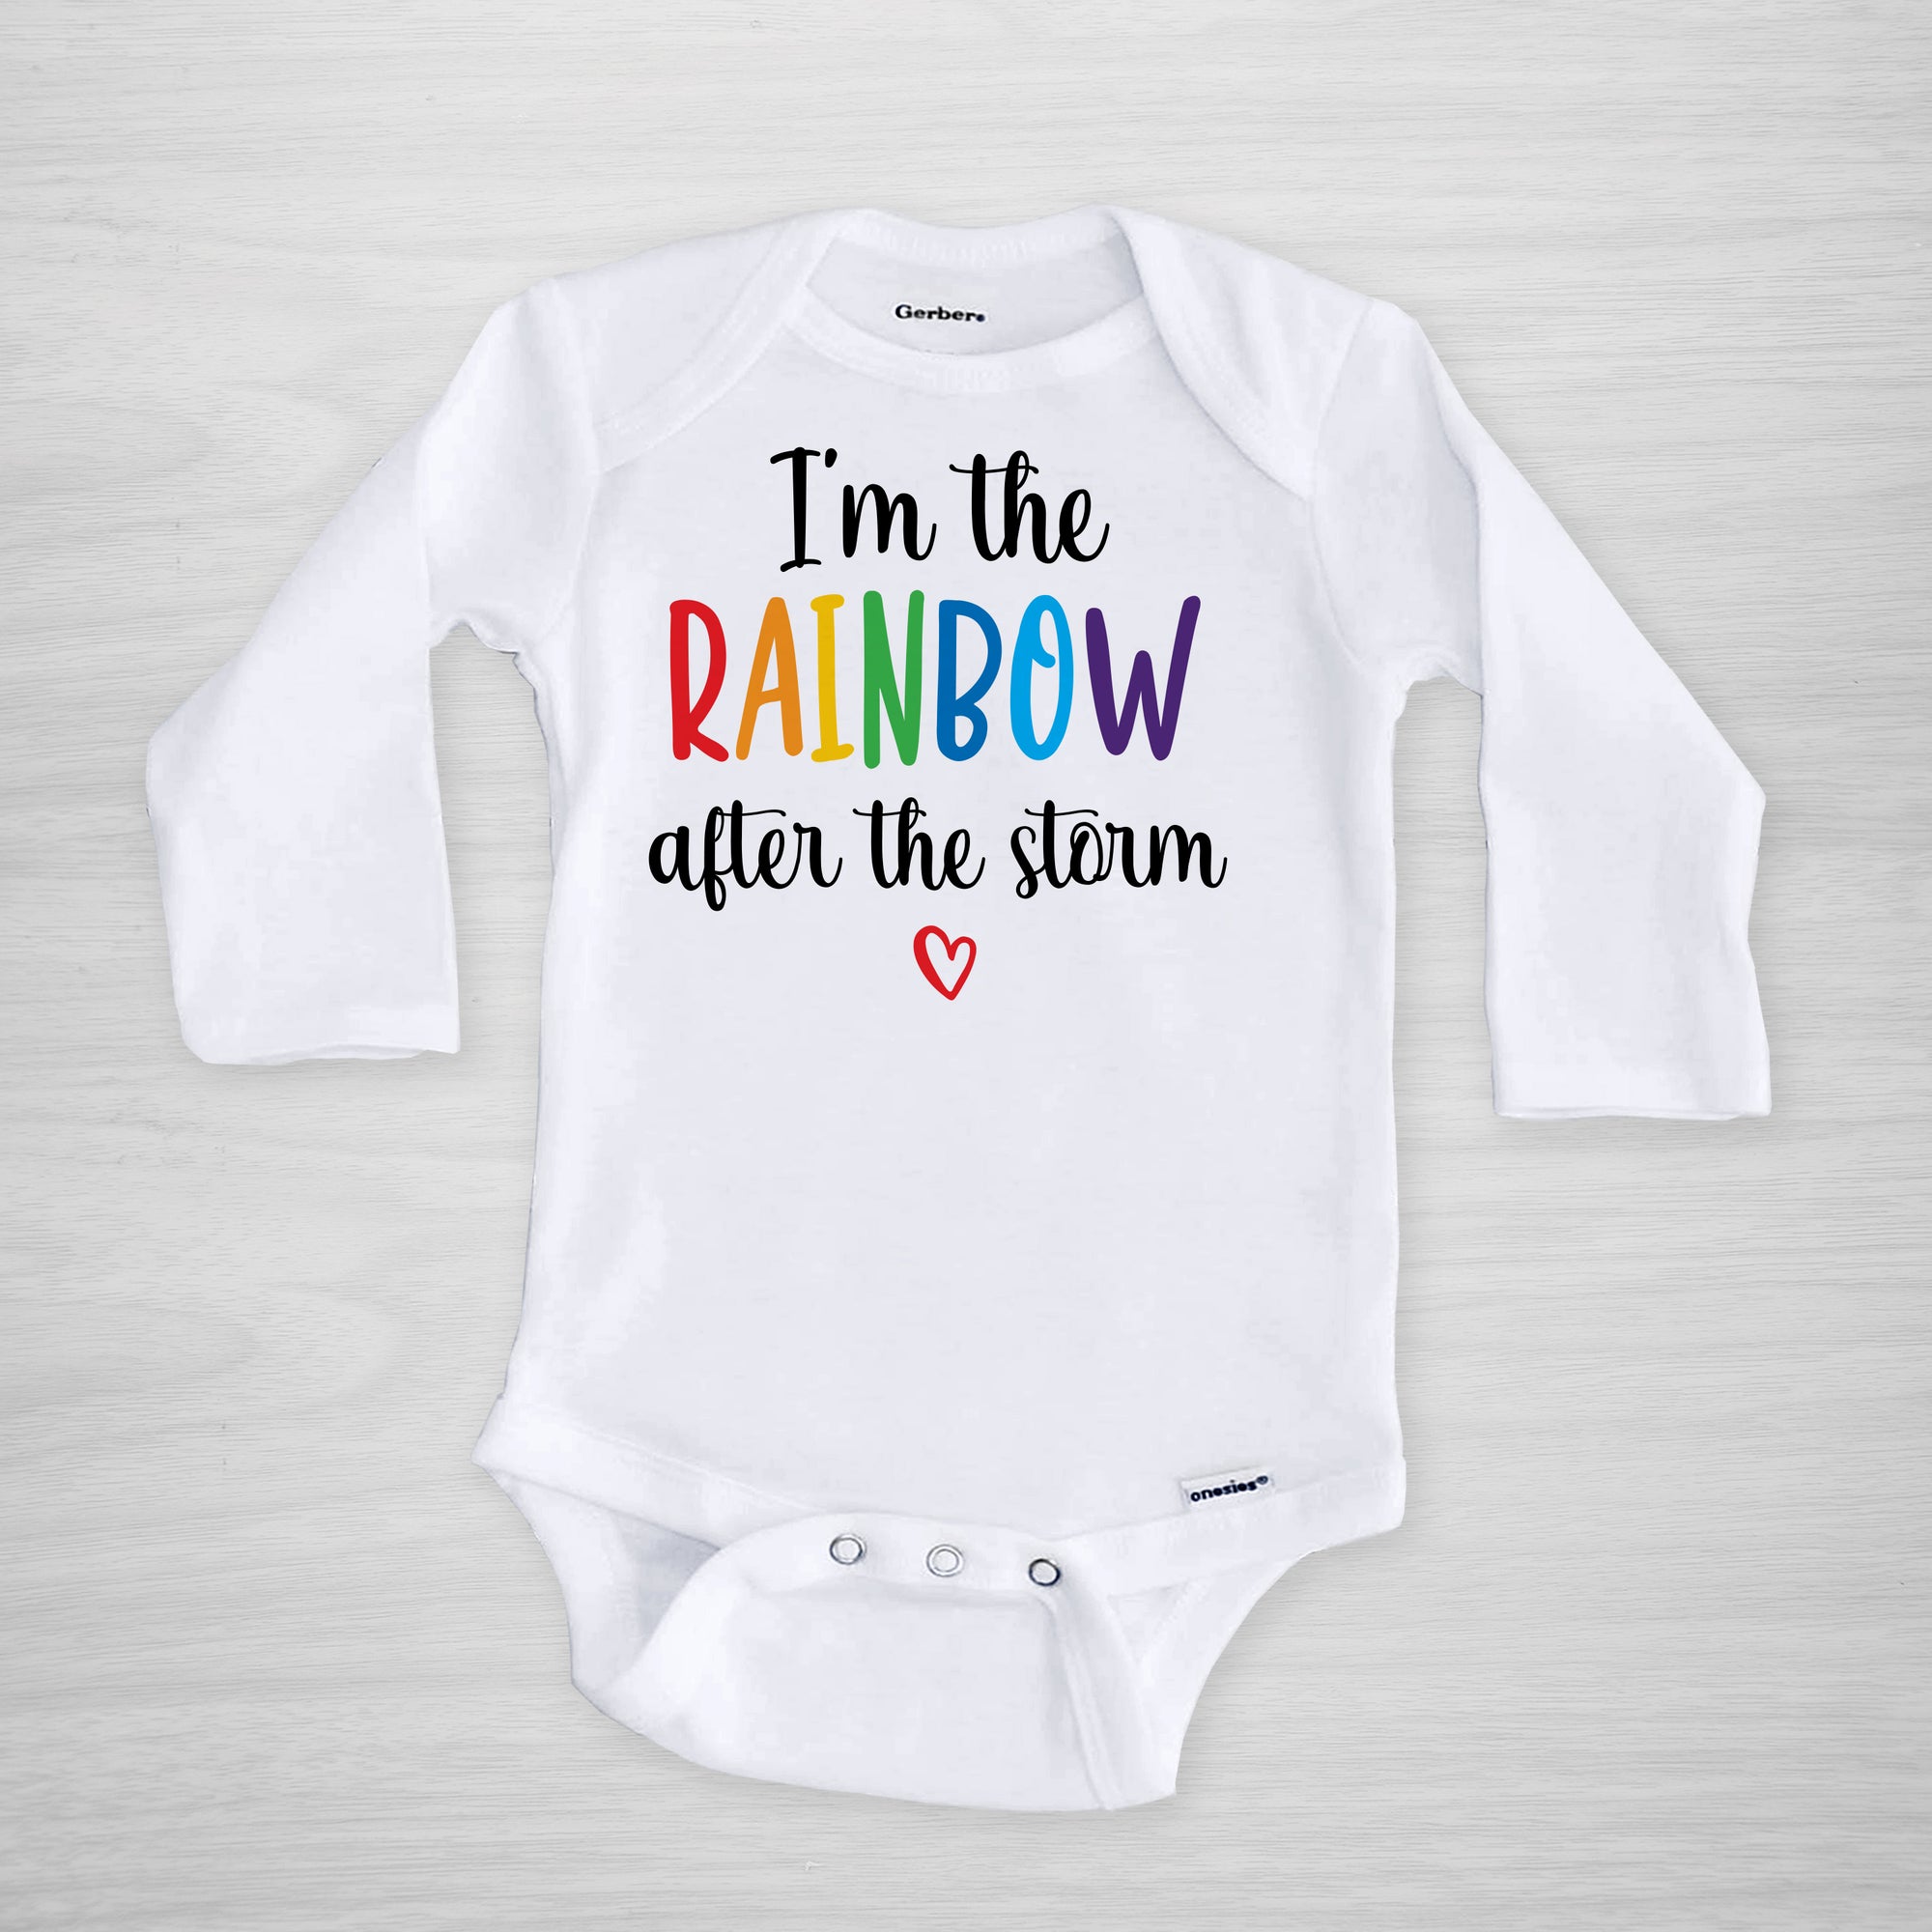 I am the rainbow after the storm personalized onesie, short sleeved